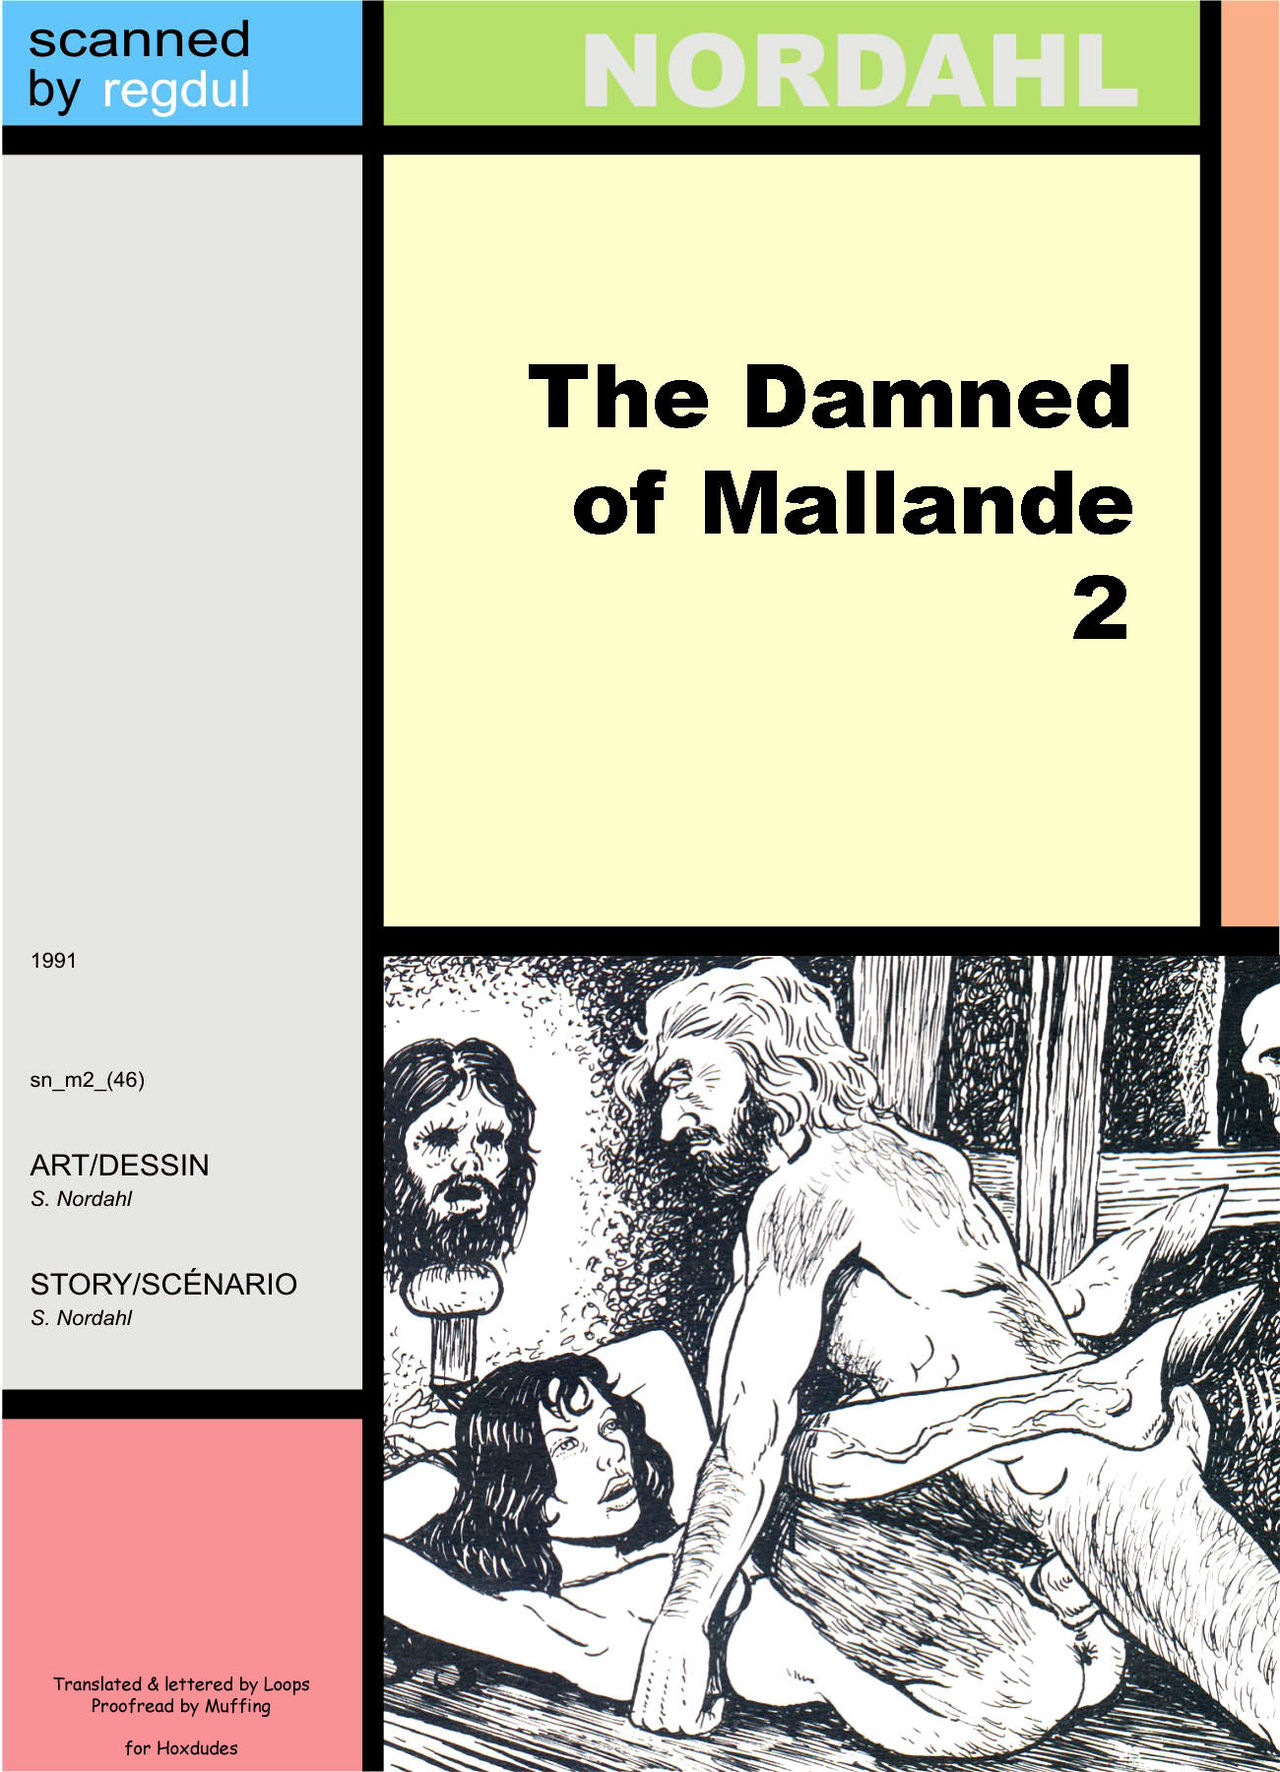 [Nordahl] The Damned of Mallande - Volume #2 [English] {Loops} 